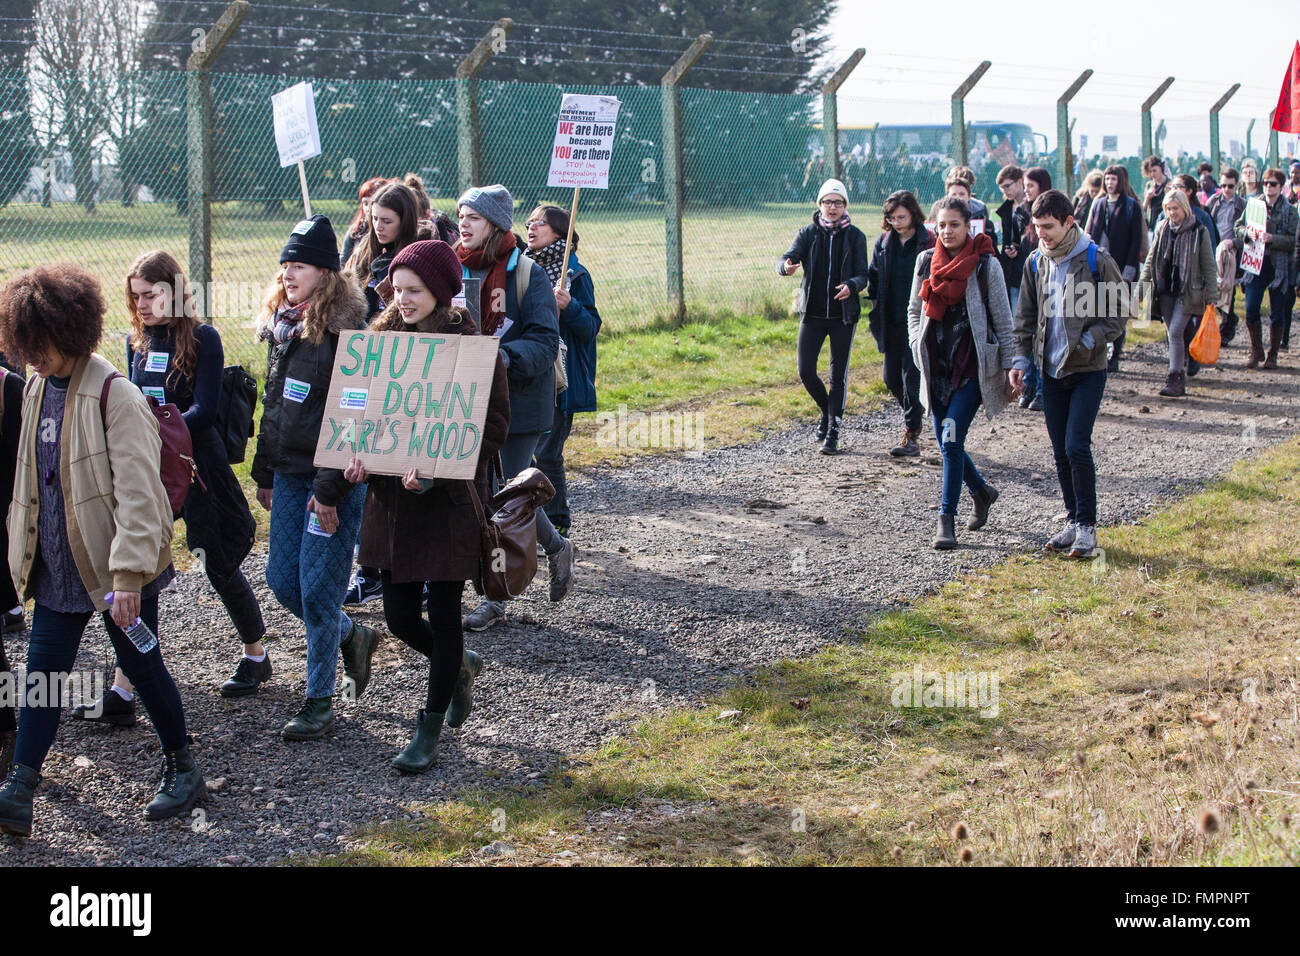 Milton Ernest, UK. 12th March, 2016. Campaigners against immigration detention call for the closure of Yarl’s Wood Immigration Removal Centre in Bedfordshire. Credit:  Mark Kerrison/Alamy Live News Stock Photo